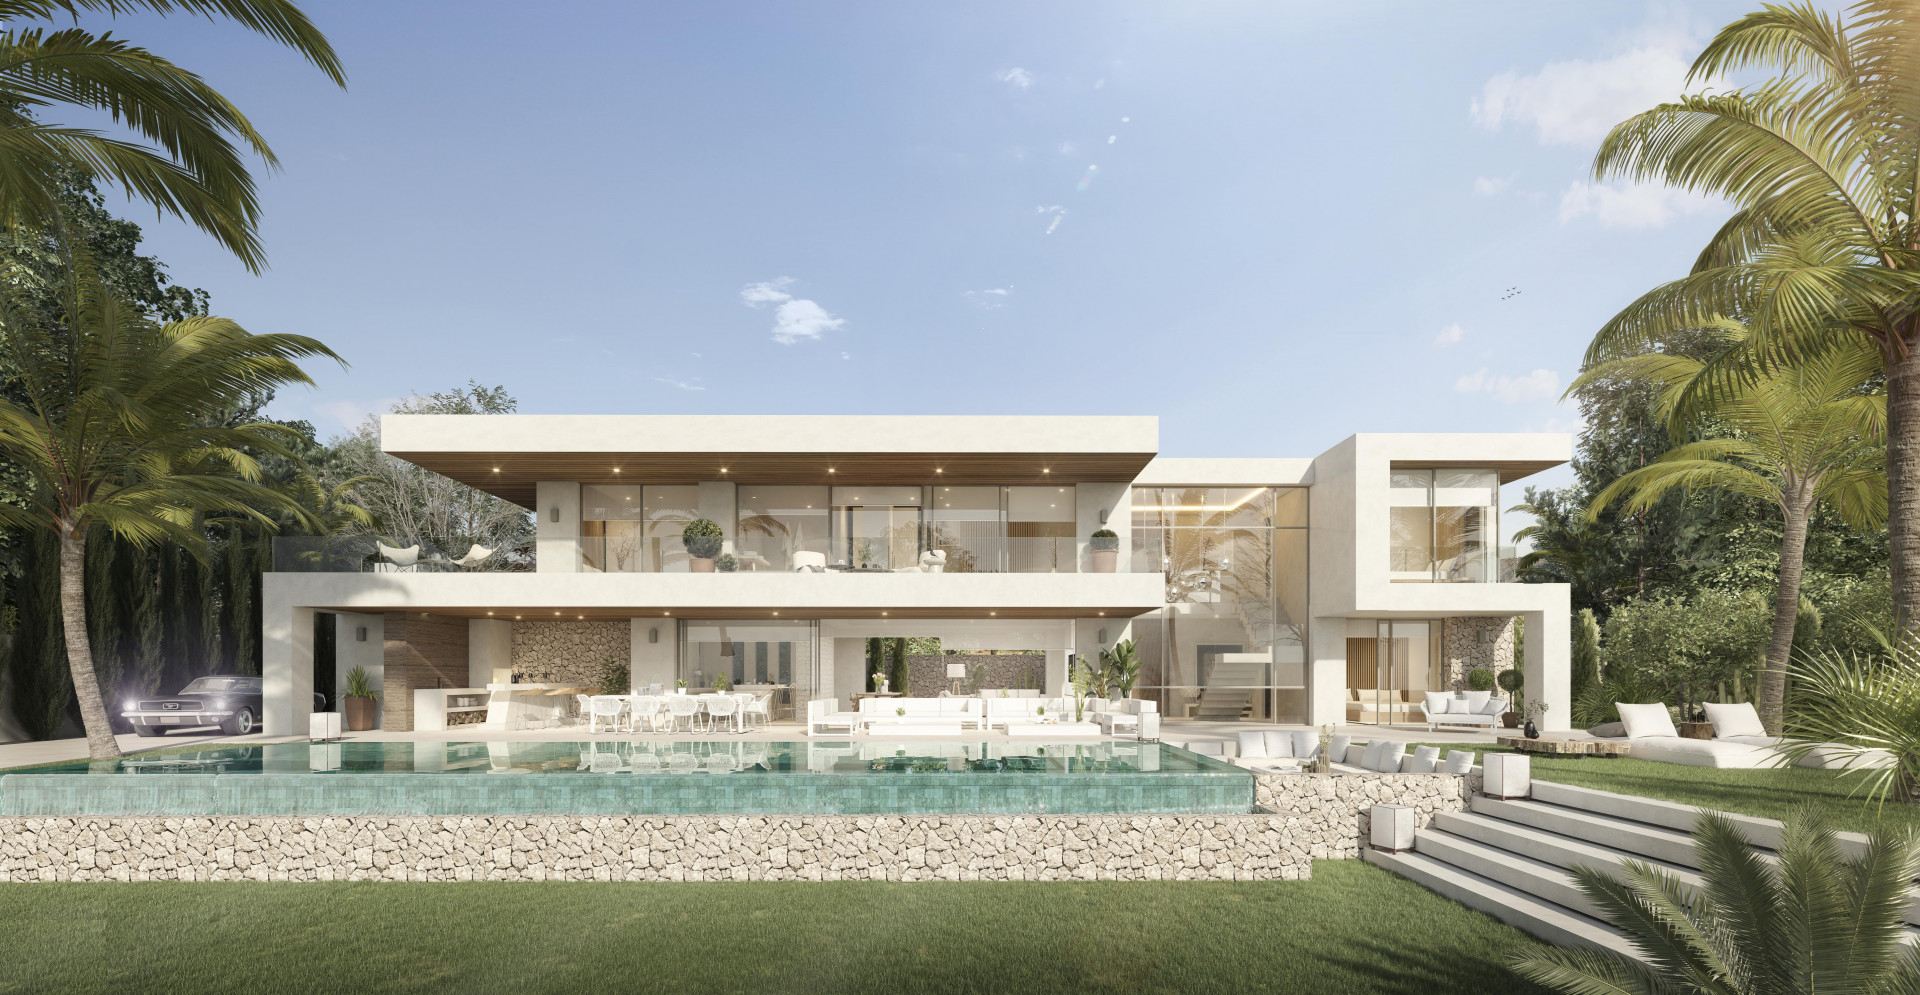 Off-plan contemporary villa just a few meters to the beach in Guadalmina Baja.